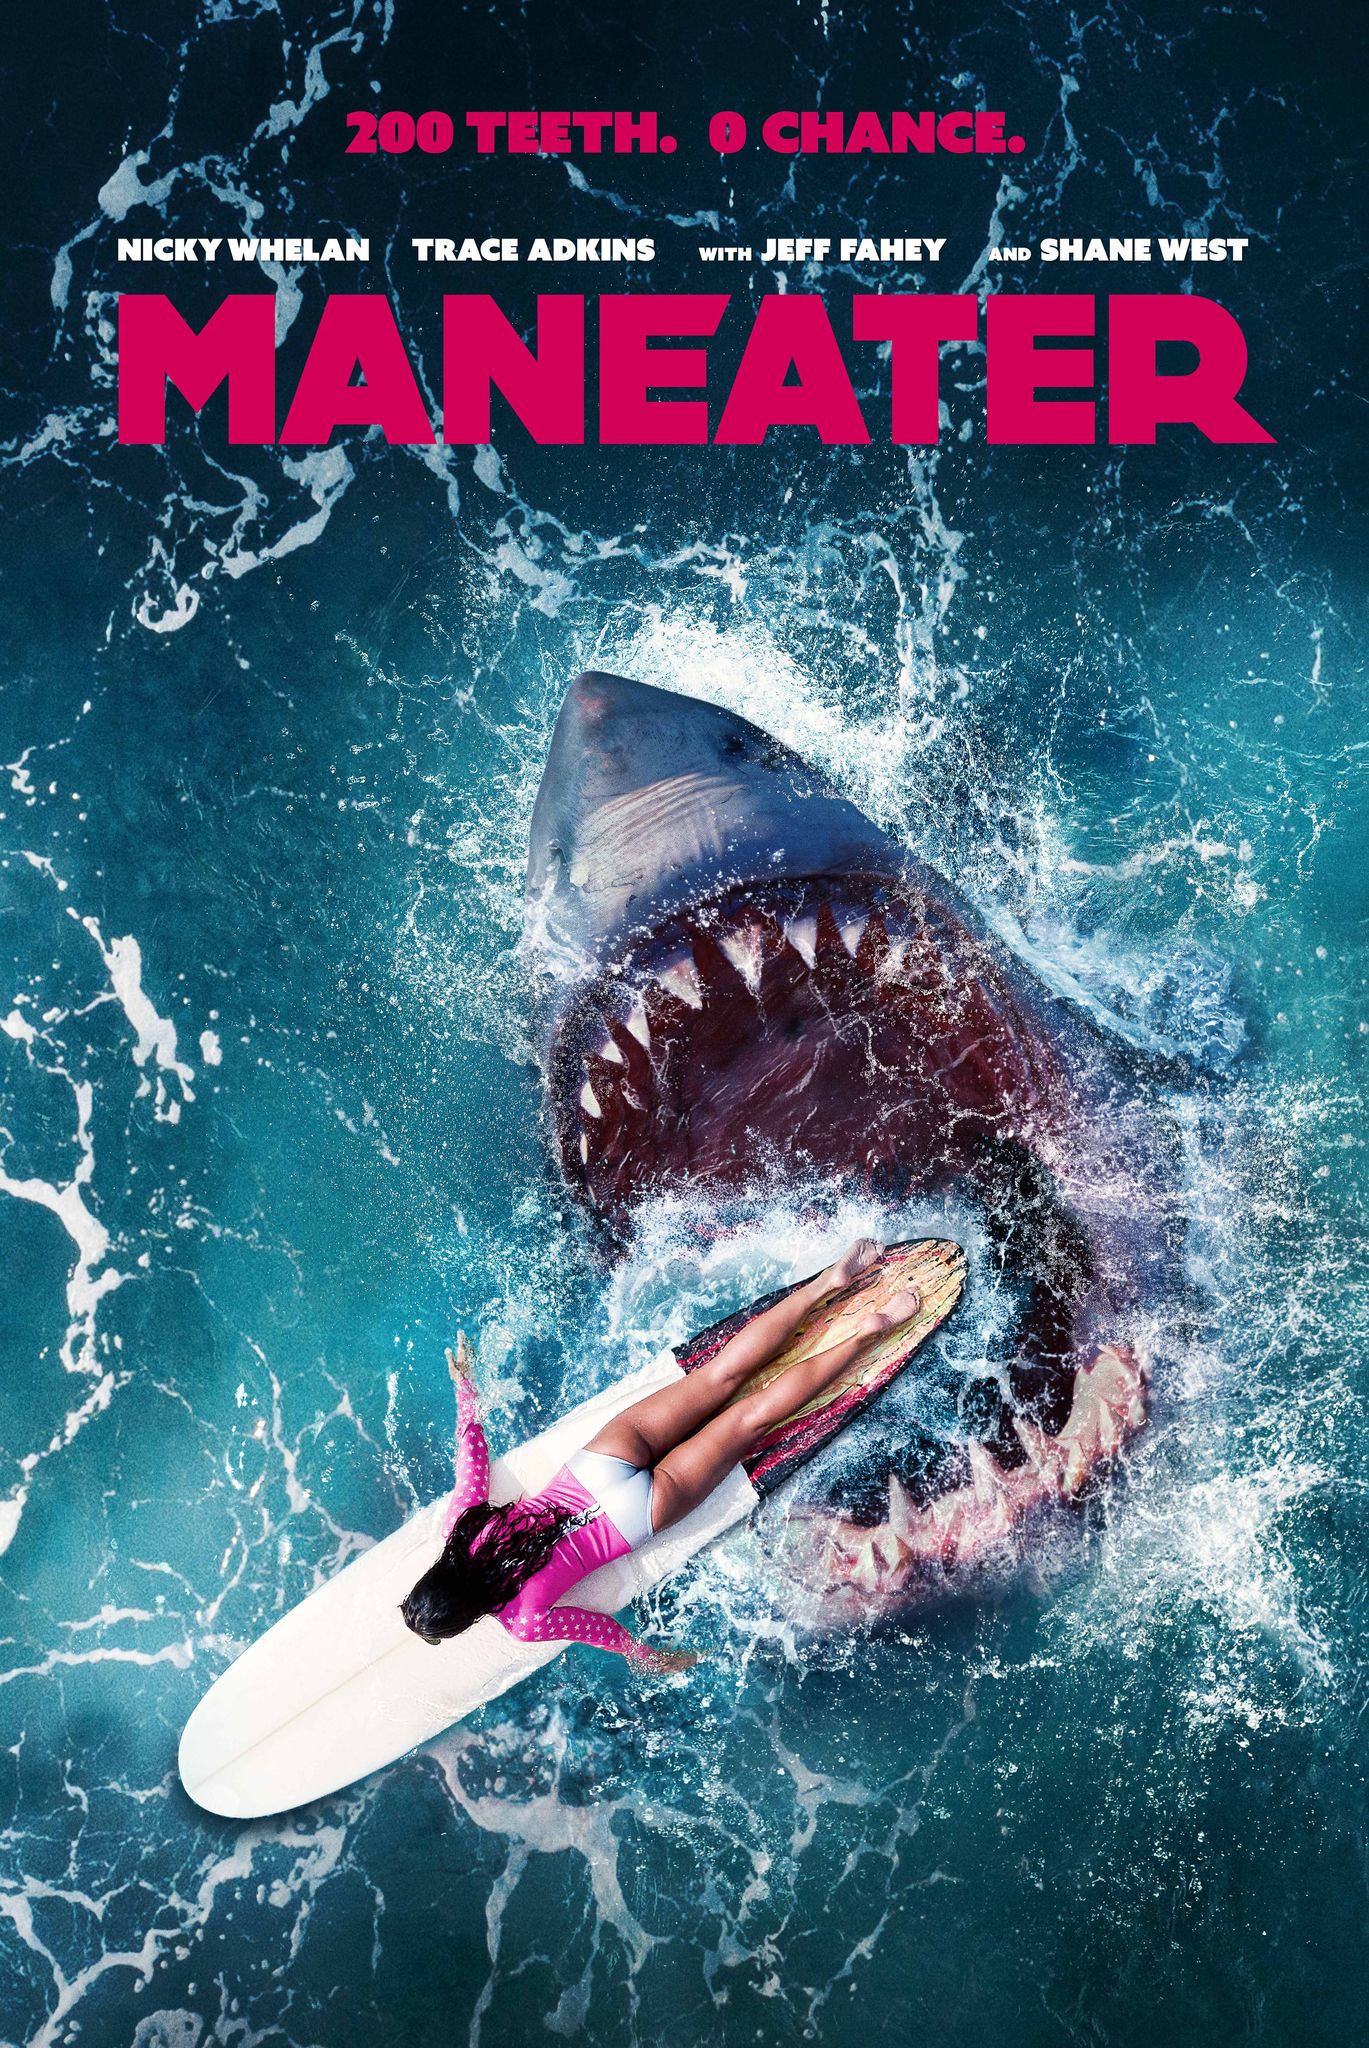 Maneater Trailer & Poster